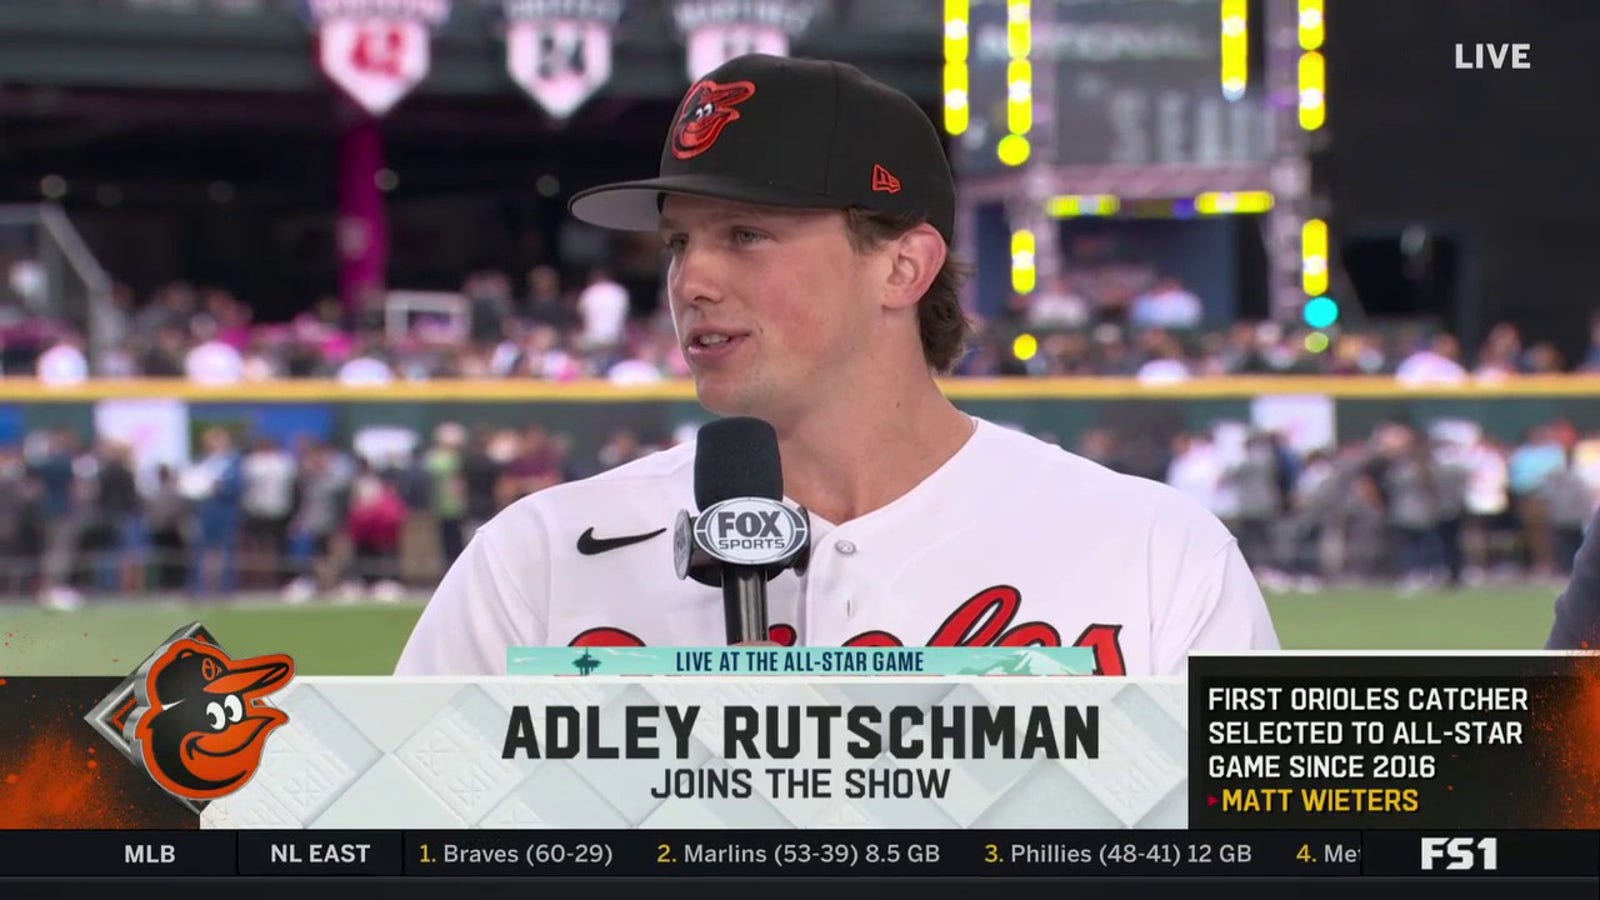 'I grew up coming here' - Orioles' Adley Rutschman at All-Star week